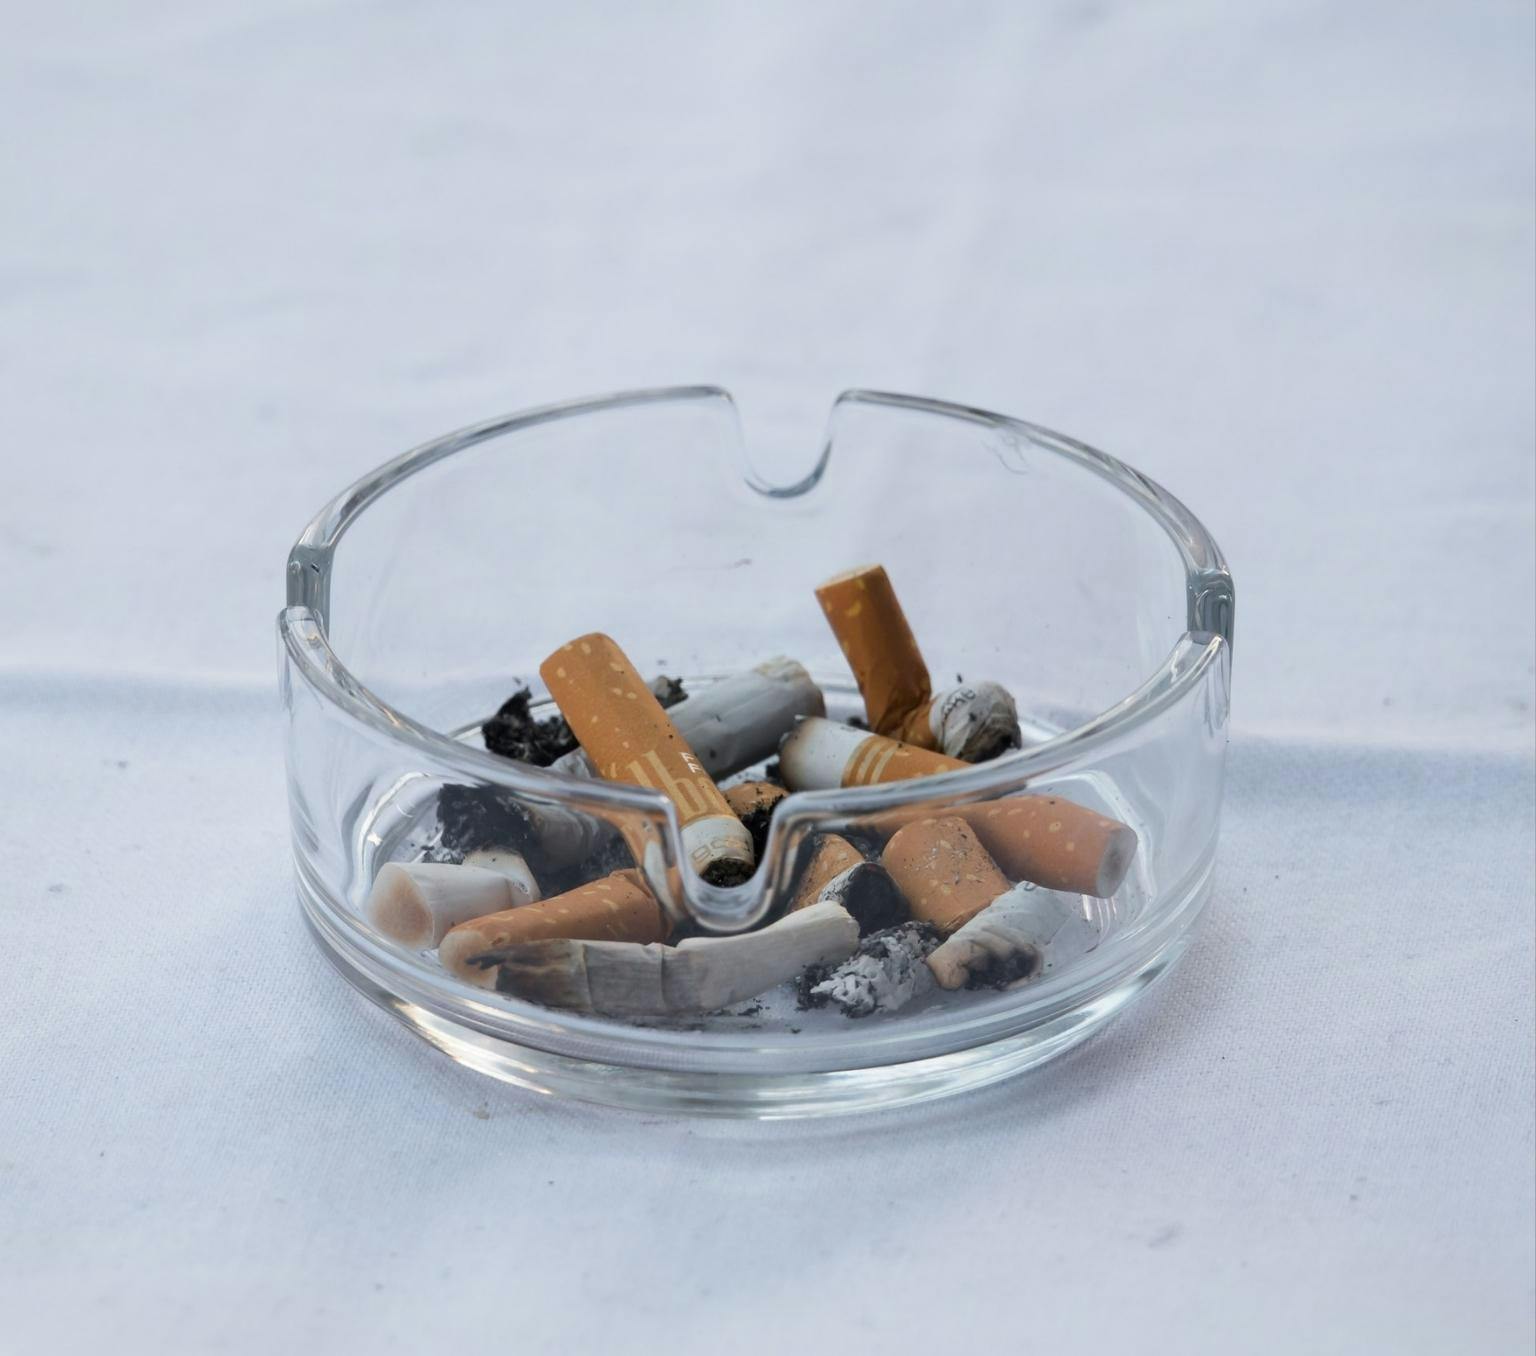 glass ashtray on a white table cloth. the ashtray is filled with burnt cigarettes and ash